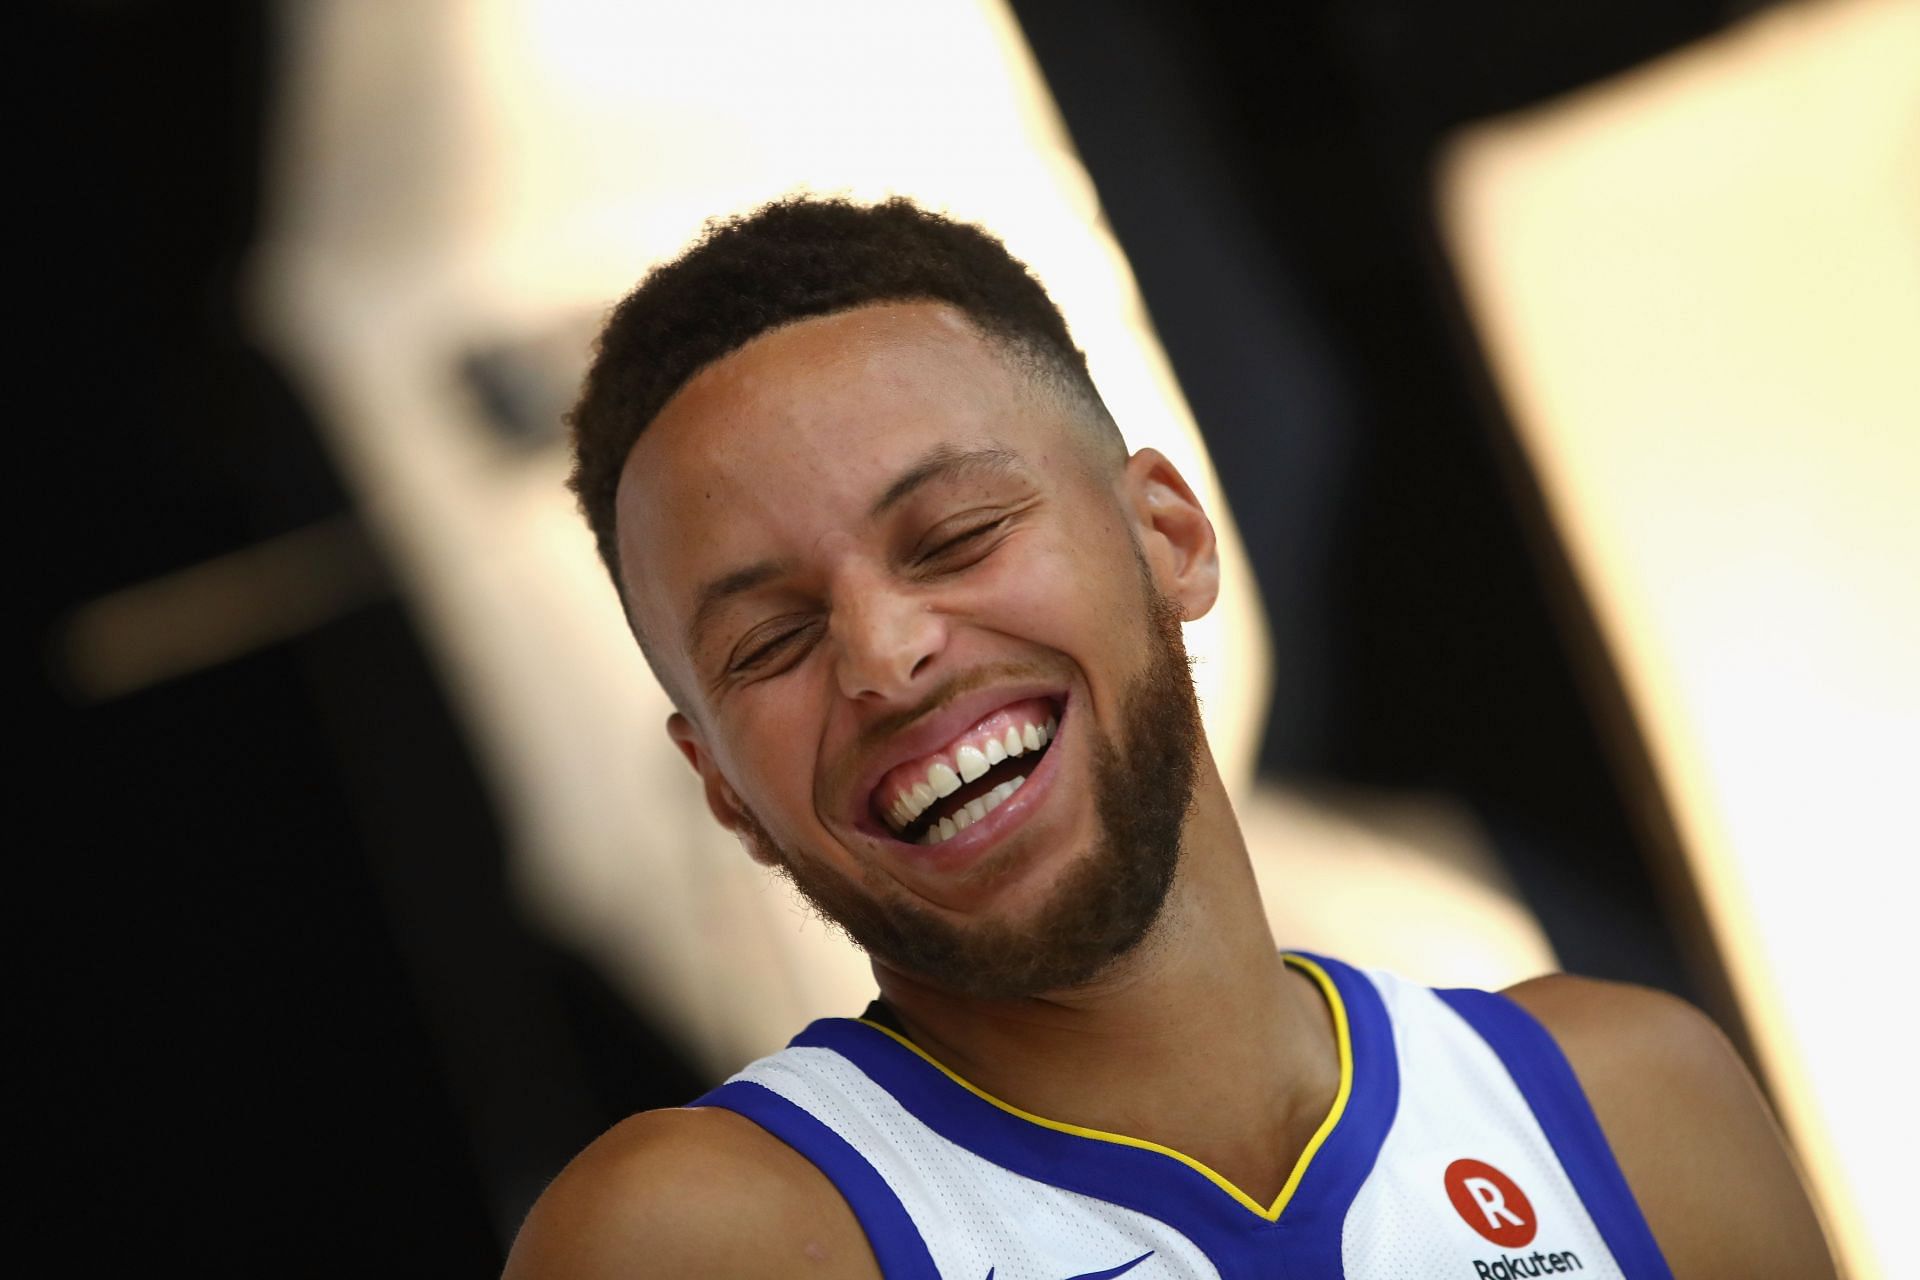 Steph Curry of the Golden State Warriors